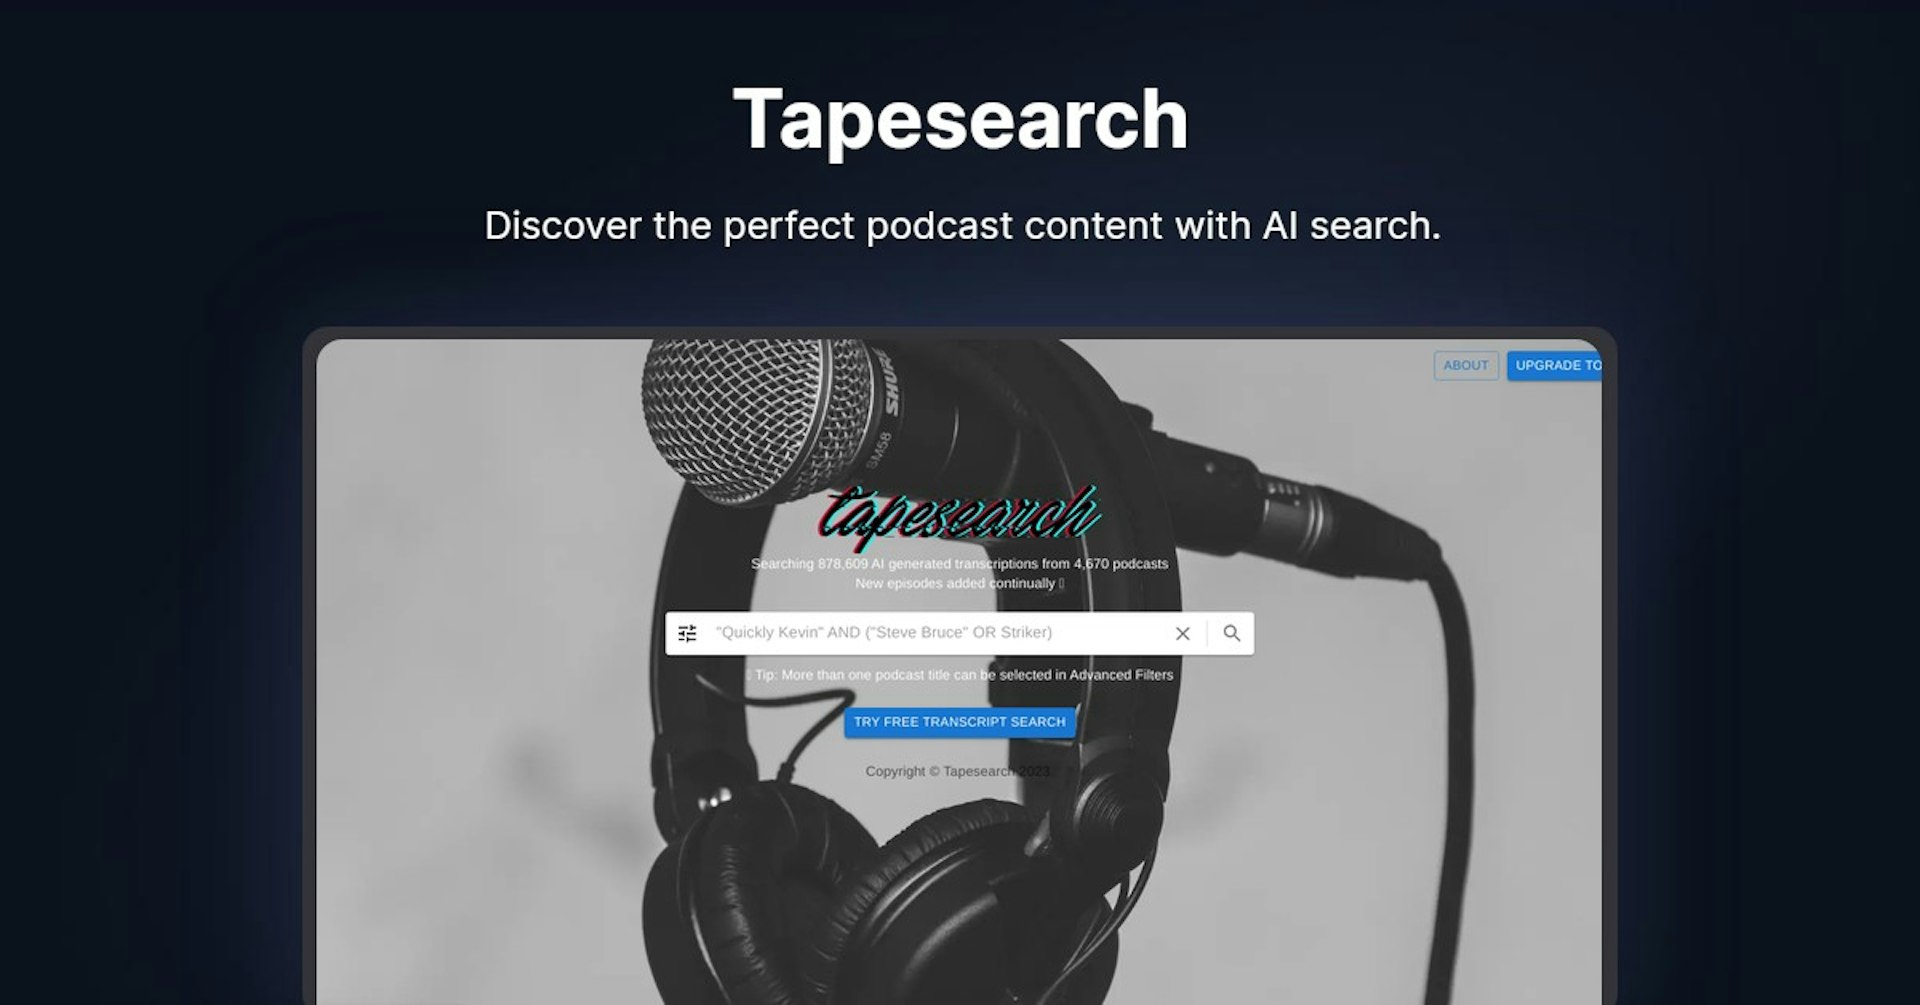 Tapesearch